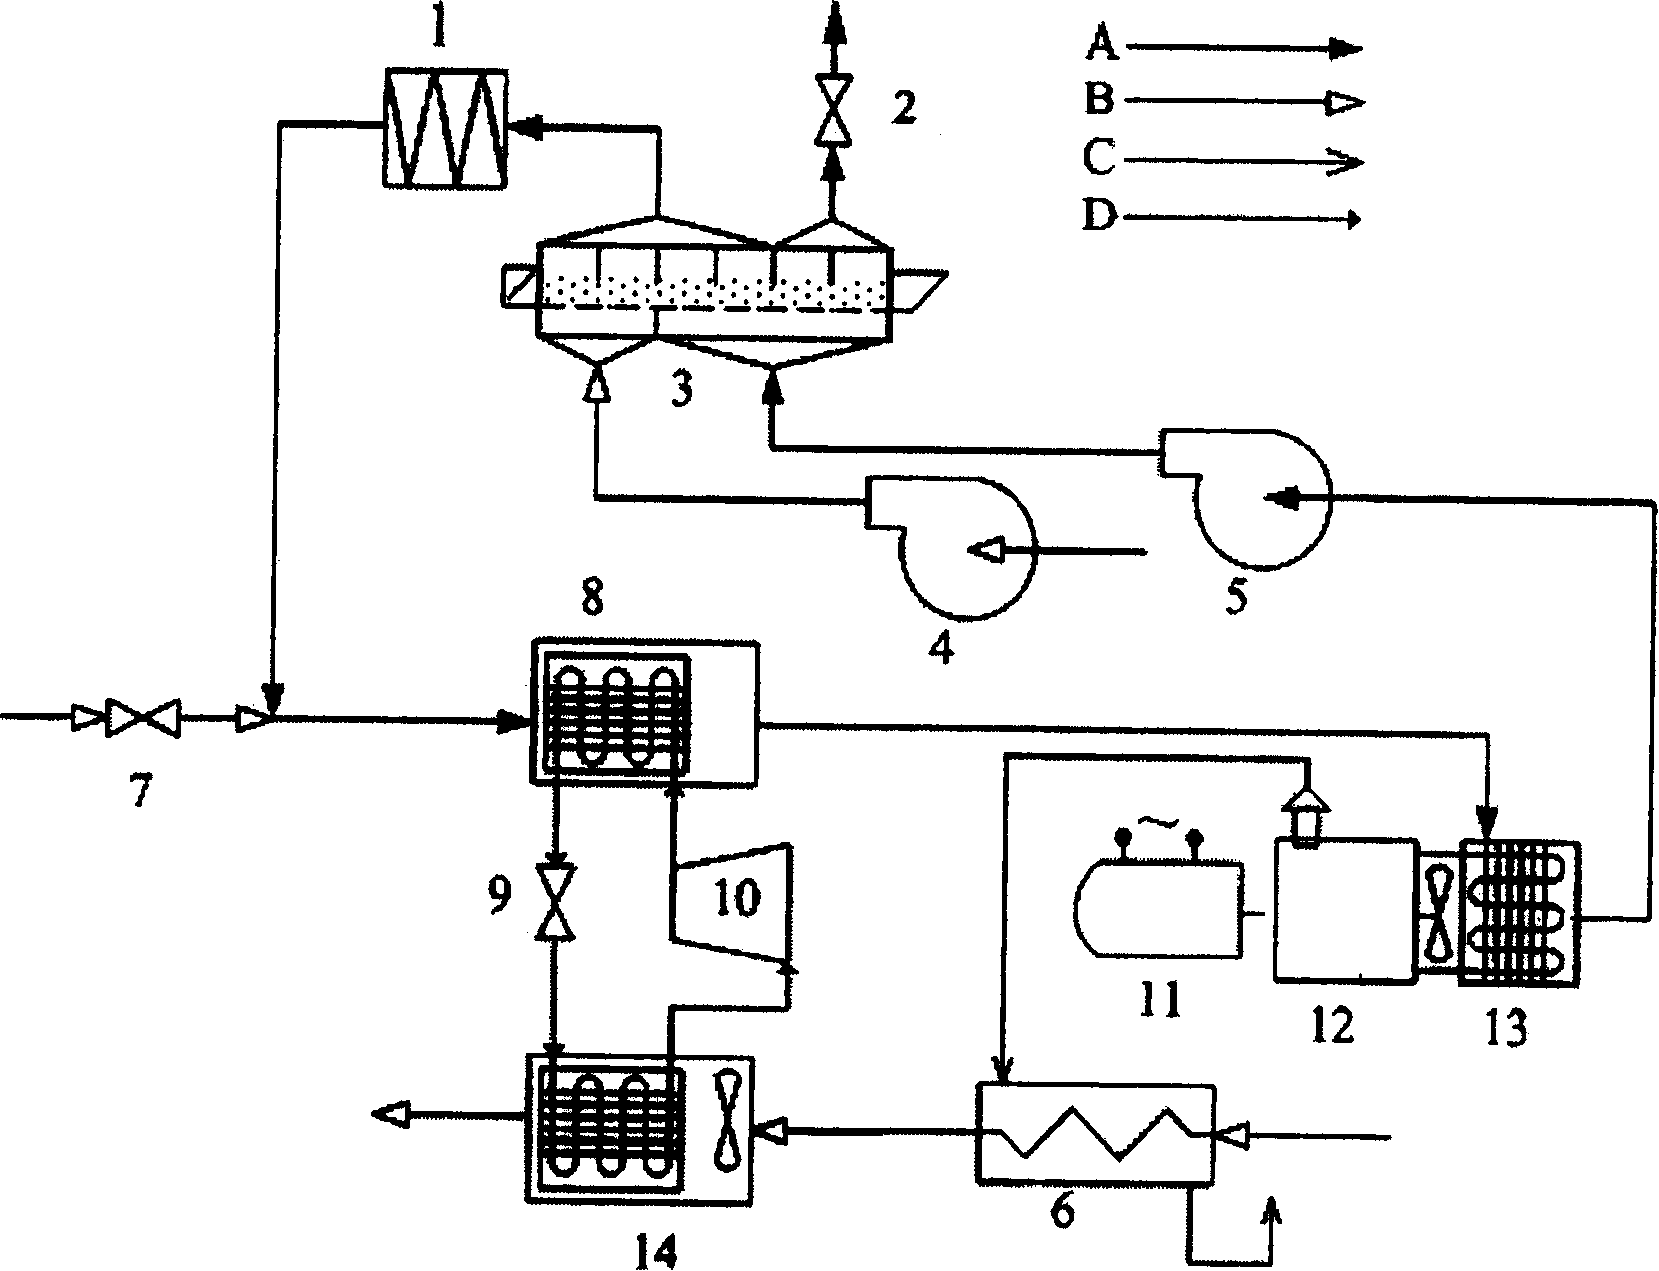 Internal combustion engine driving heat pump fluidized bed drying device capable of recovering used heat